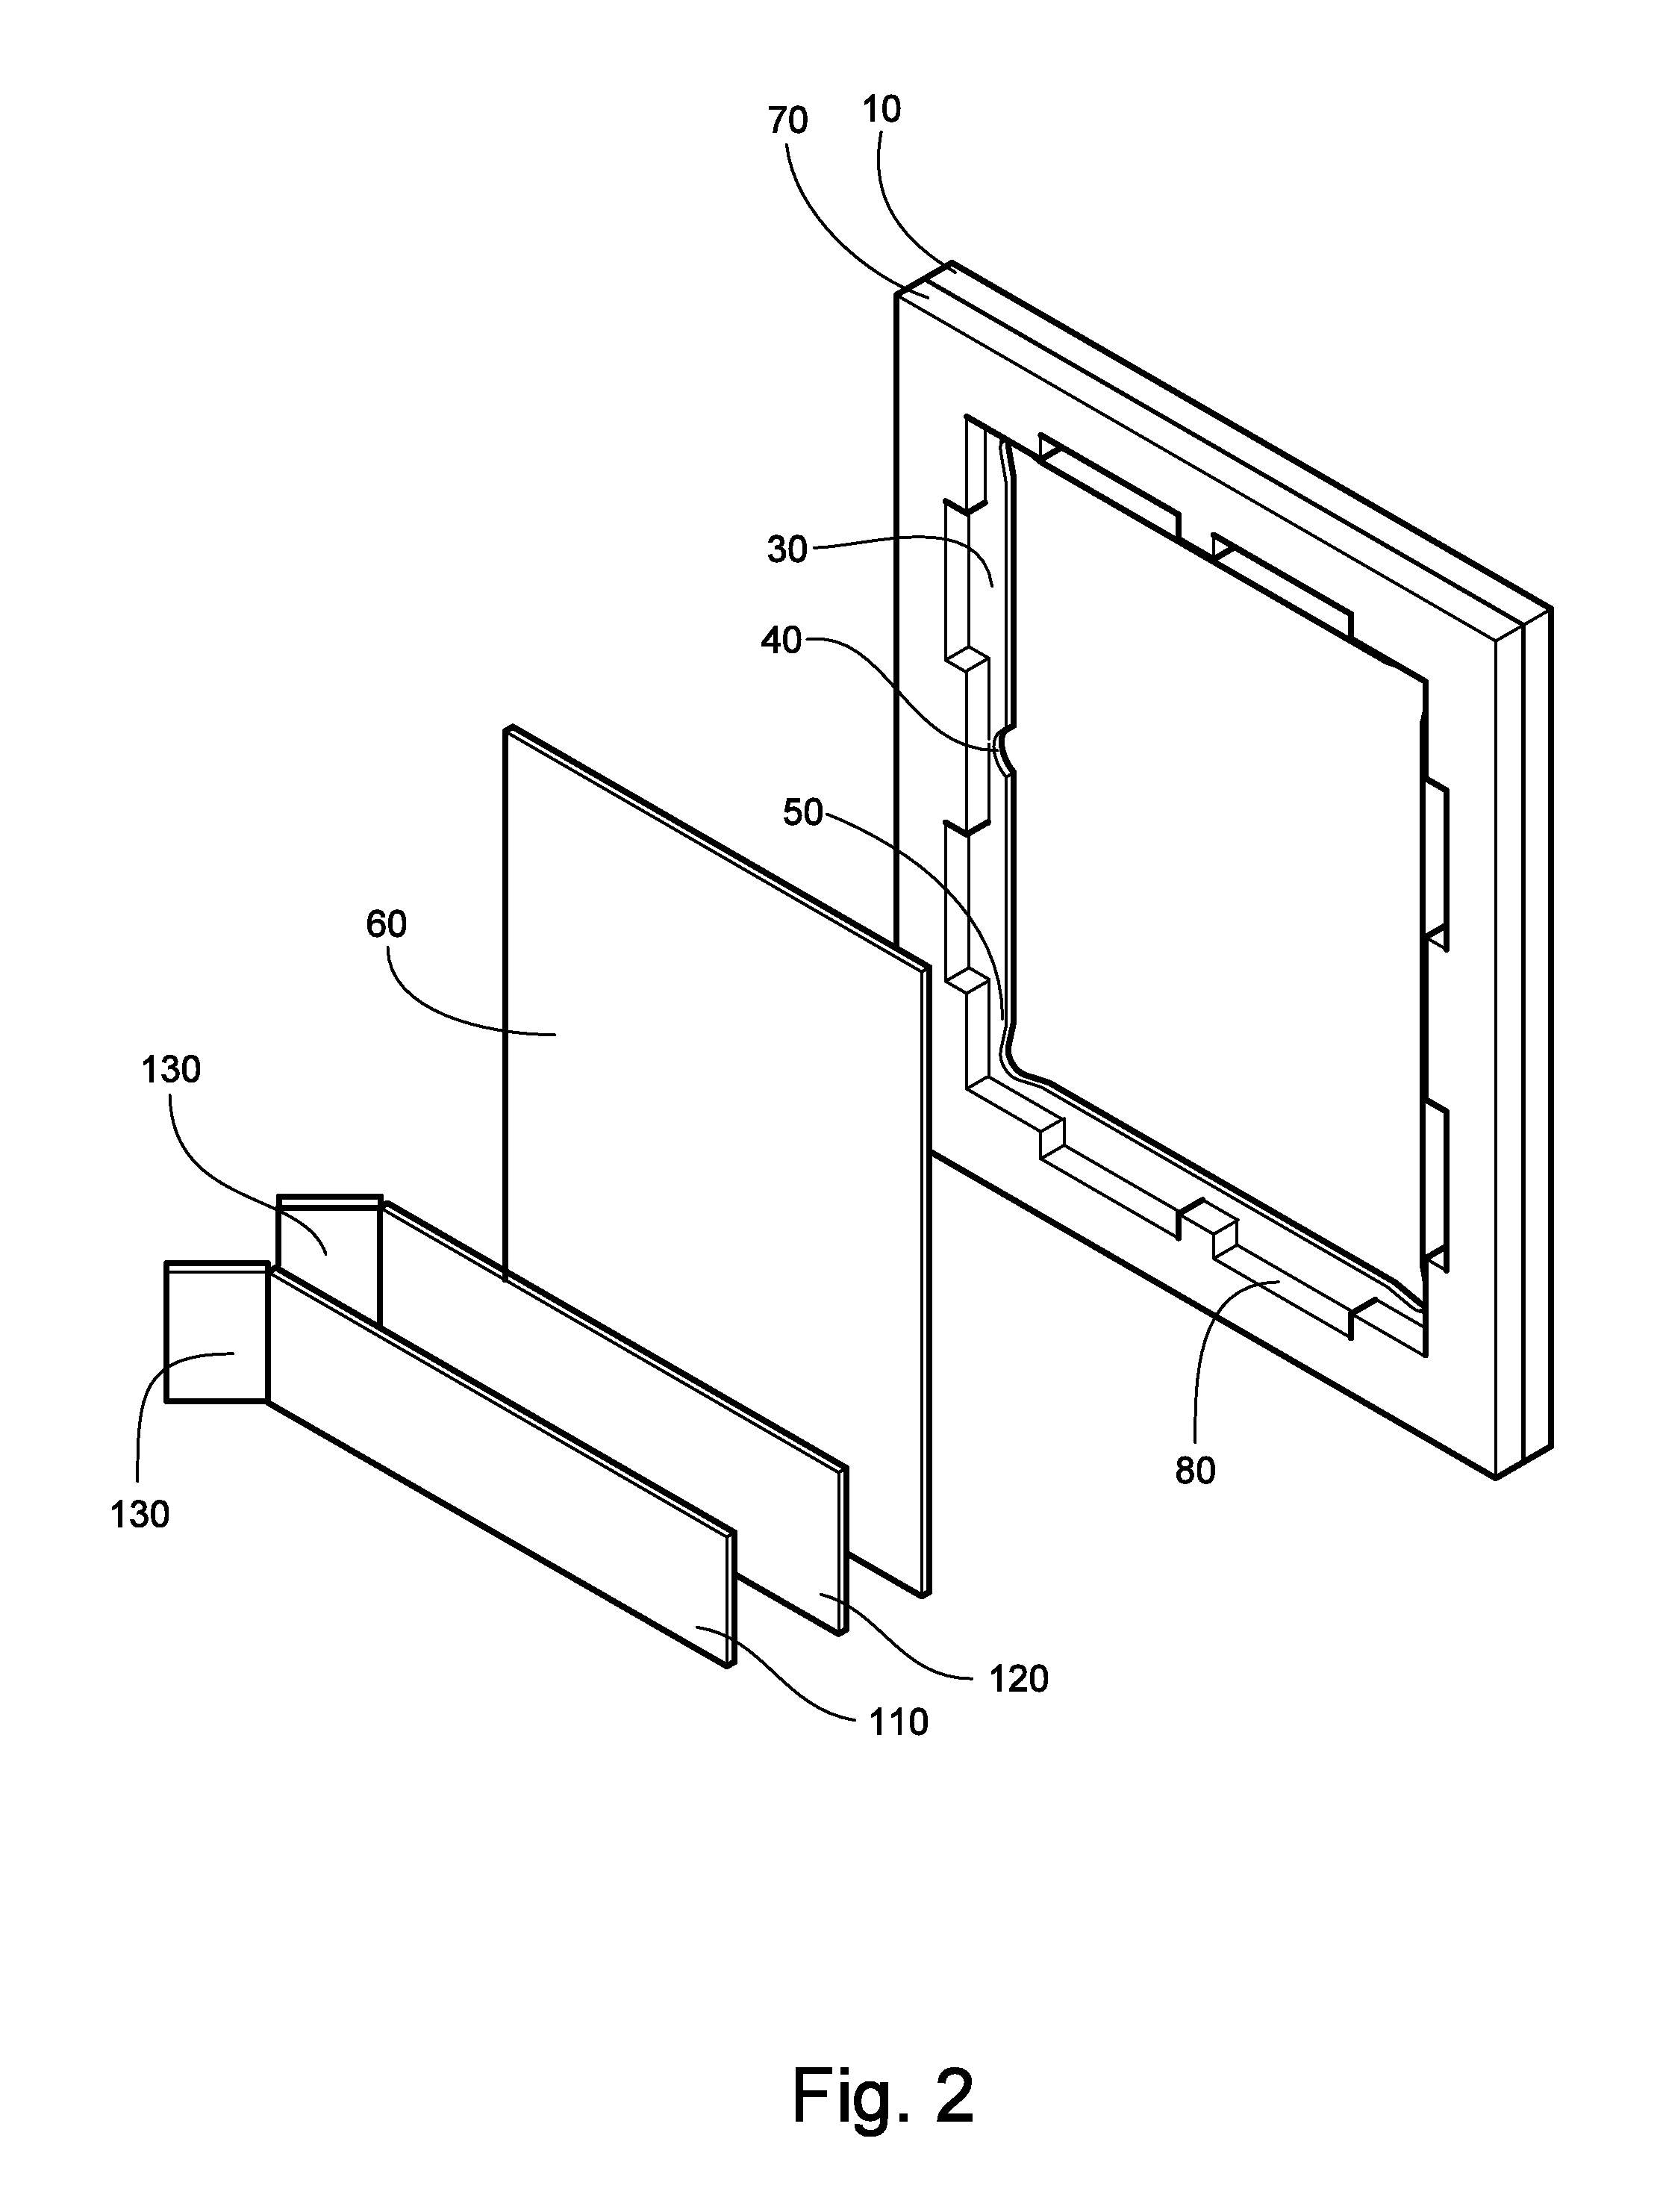 Device and Method for Cutting Mat and Liner for Double Matted Framed Artwork